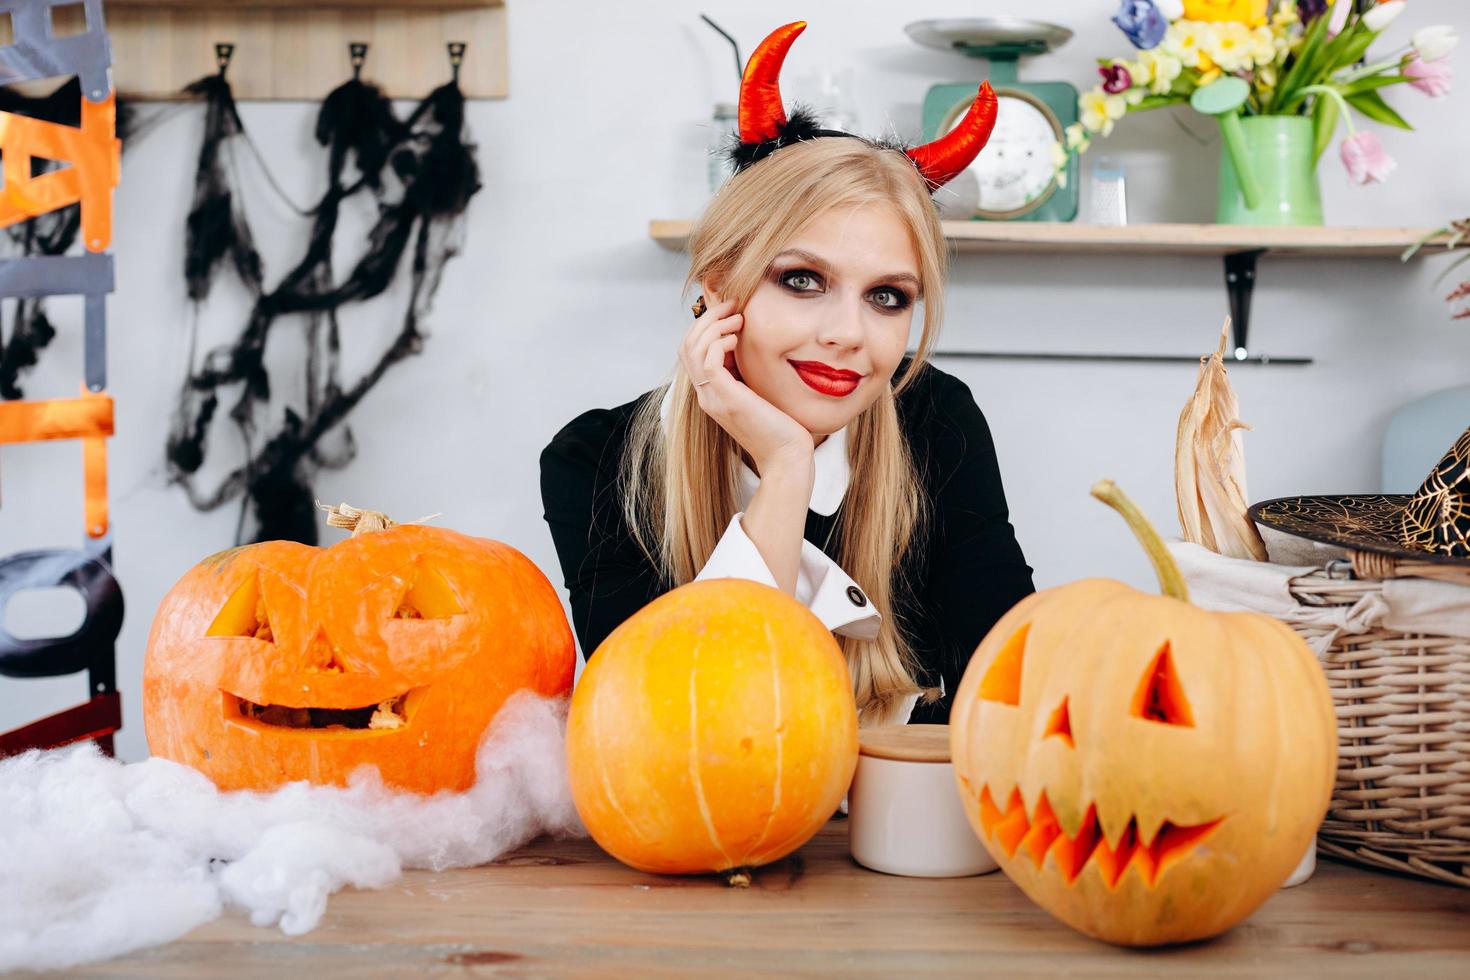 Devil woman sitting at the table next a pumpkins and smiling looking at the camera photo